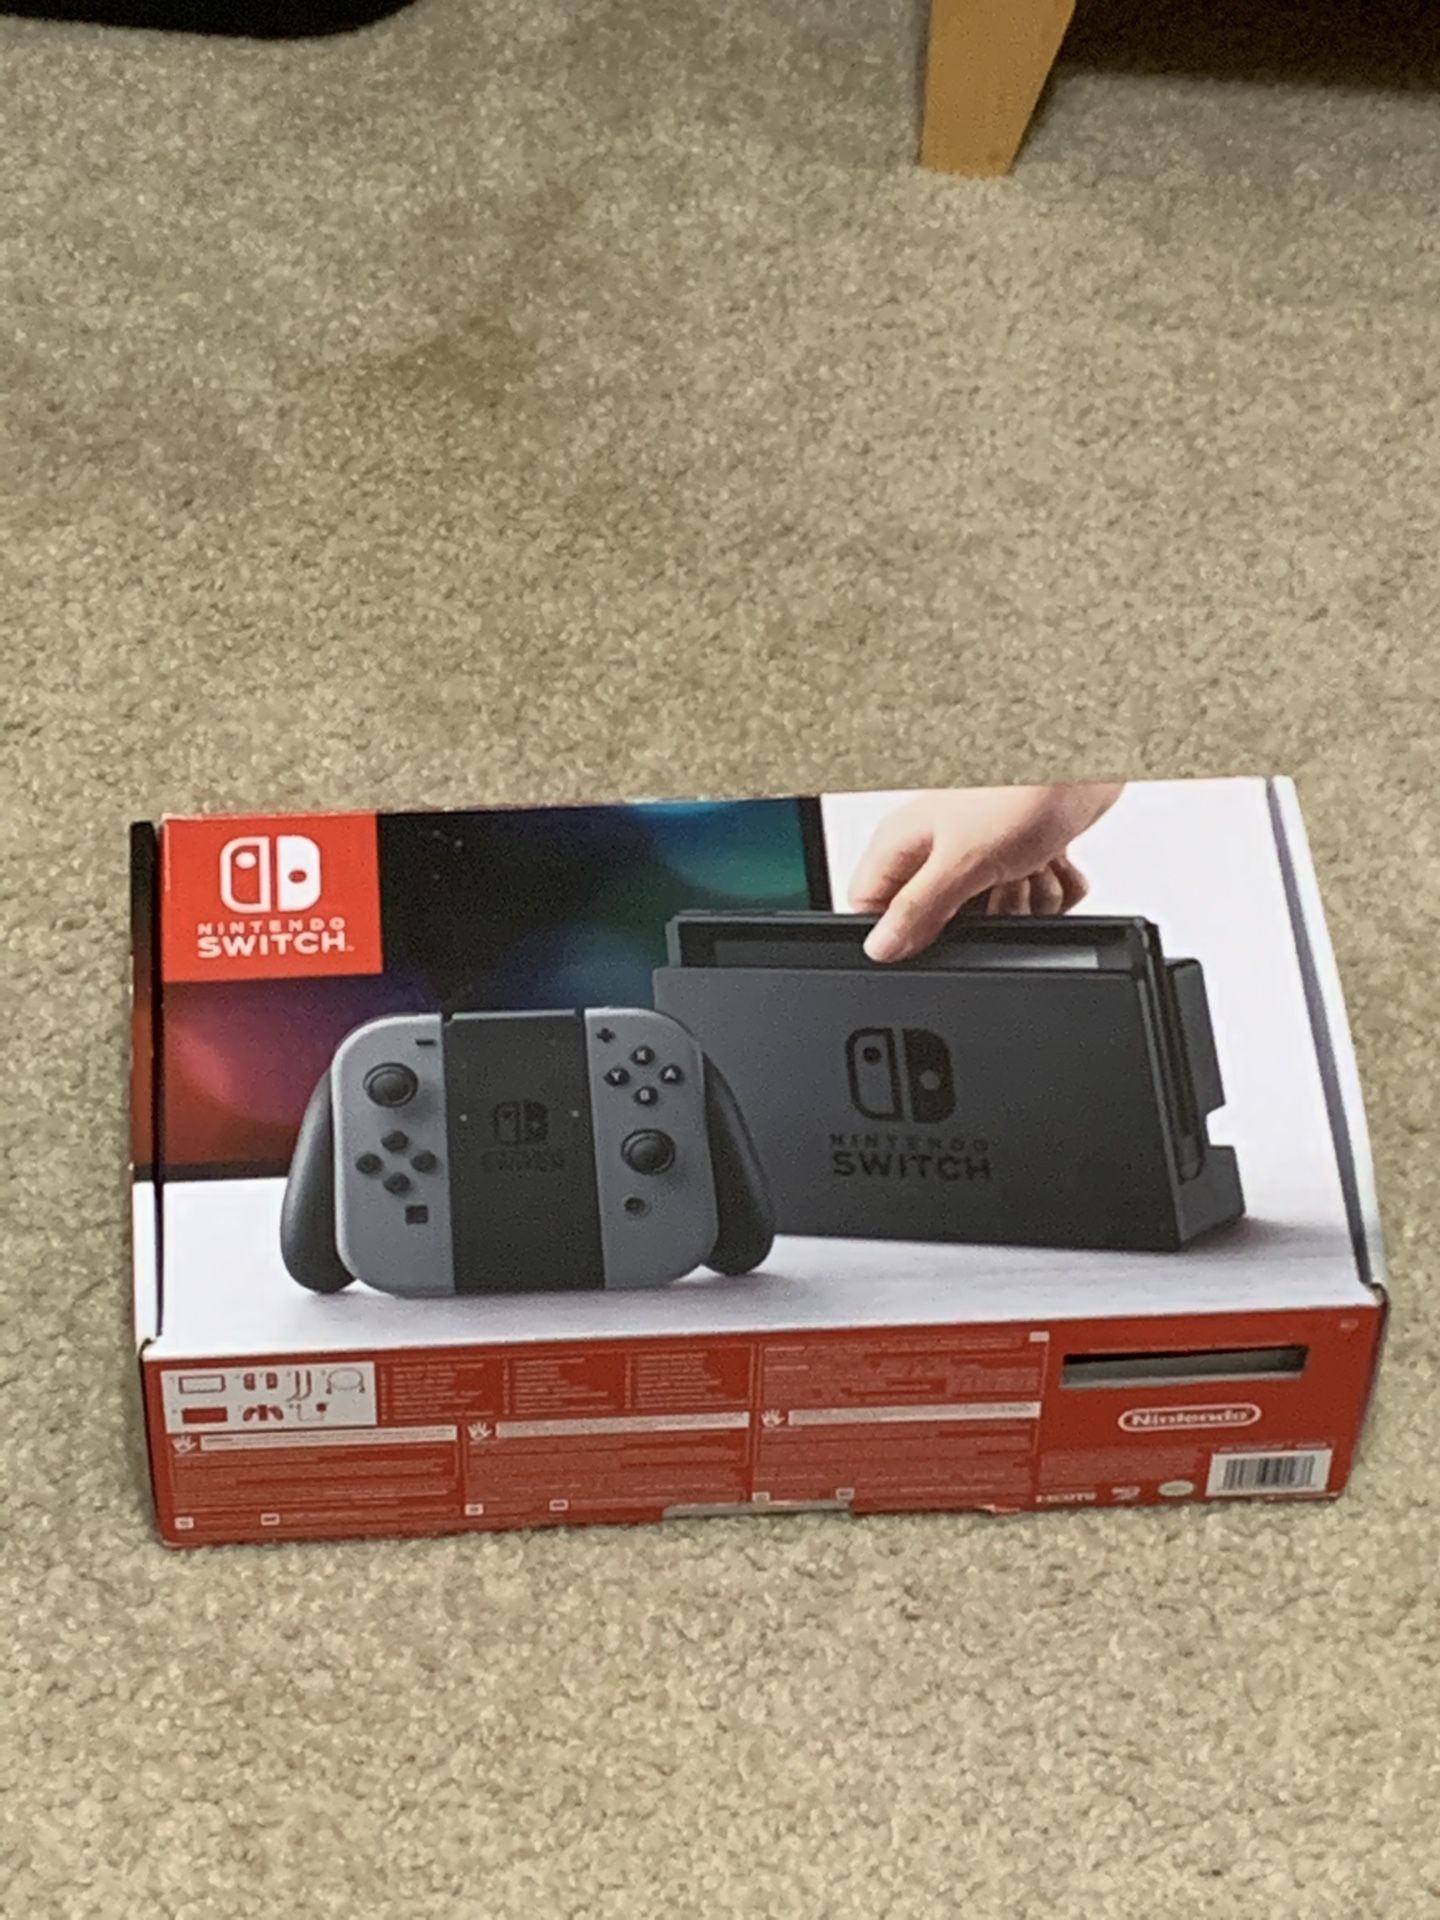 Nintendo Switch with games and accessories.